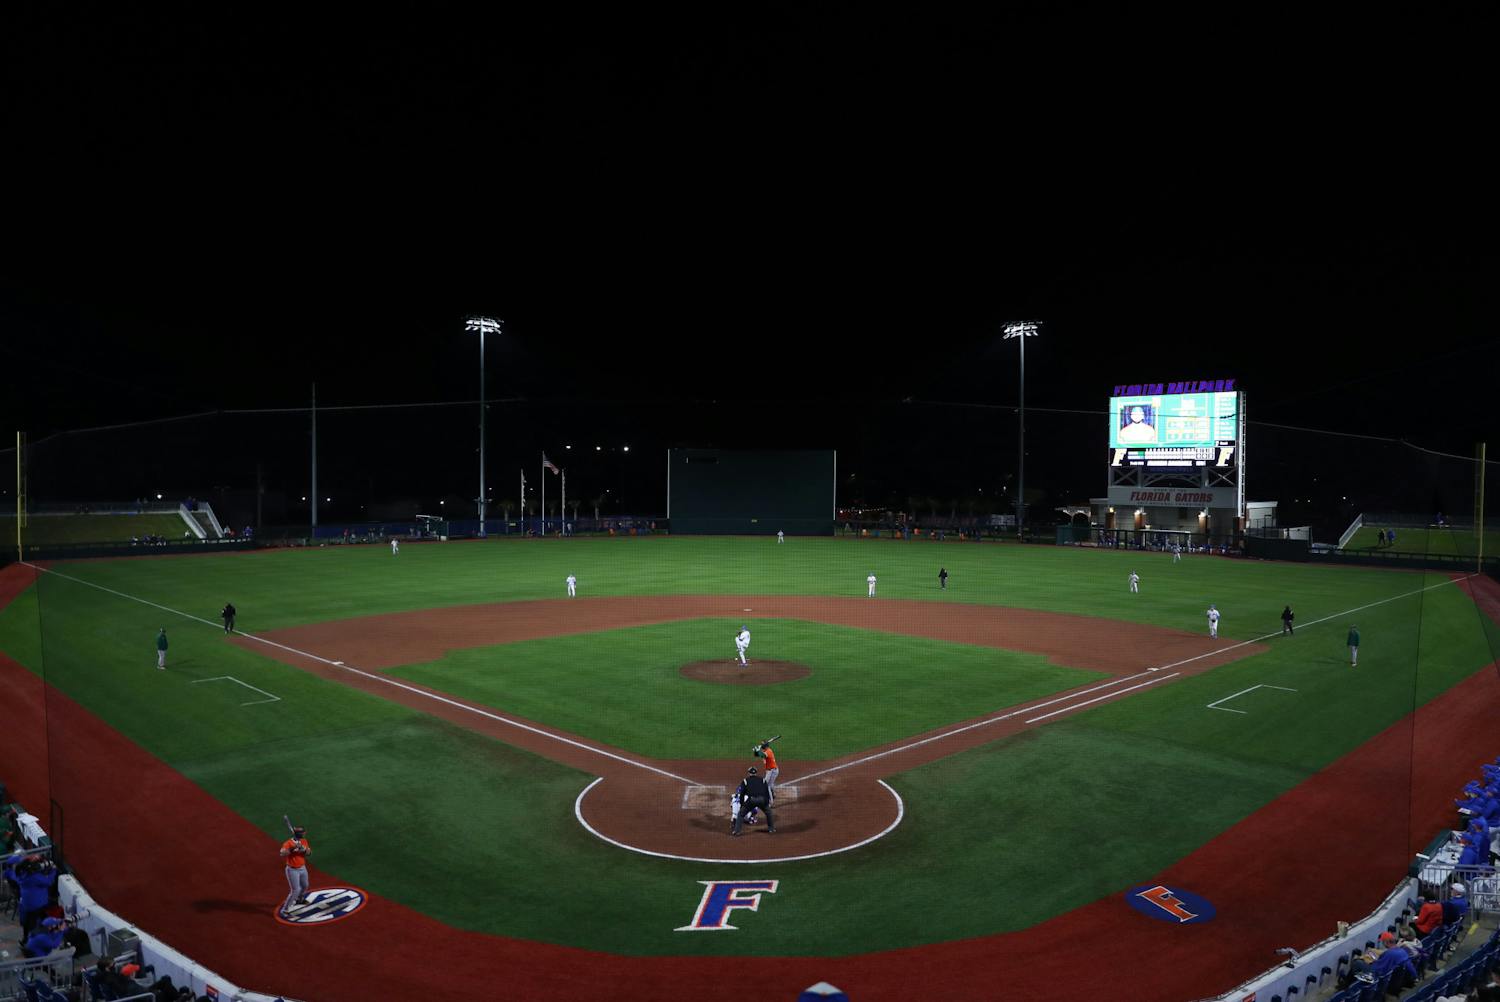 The Gators won Friday's opening game in the new Florida Ballpark. Photo courtesy of the UAA.